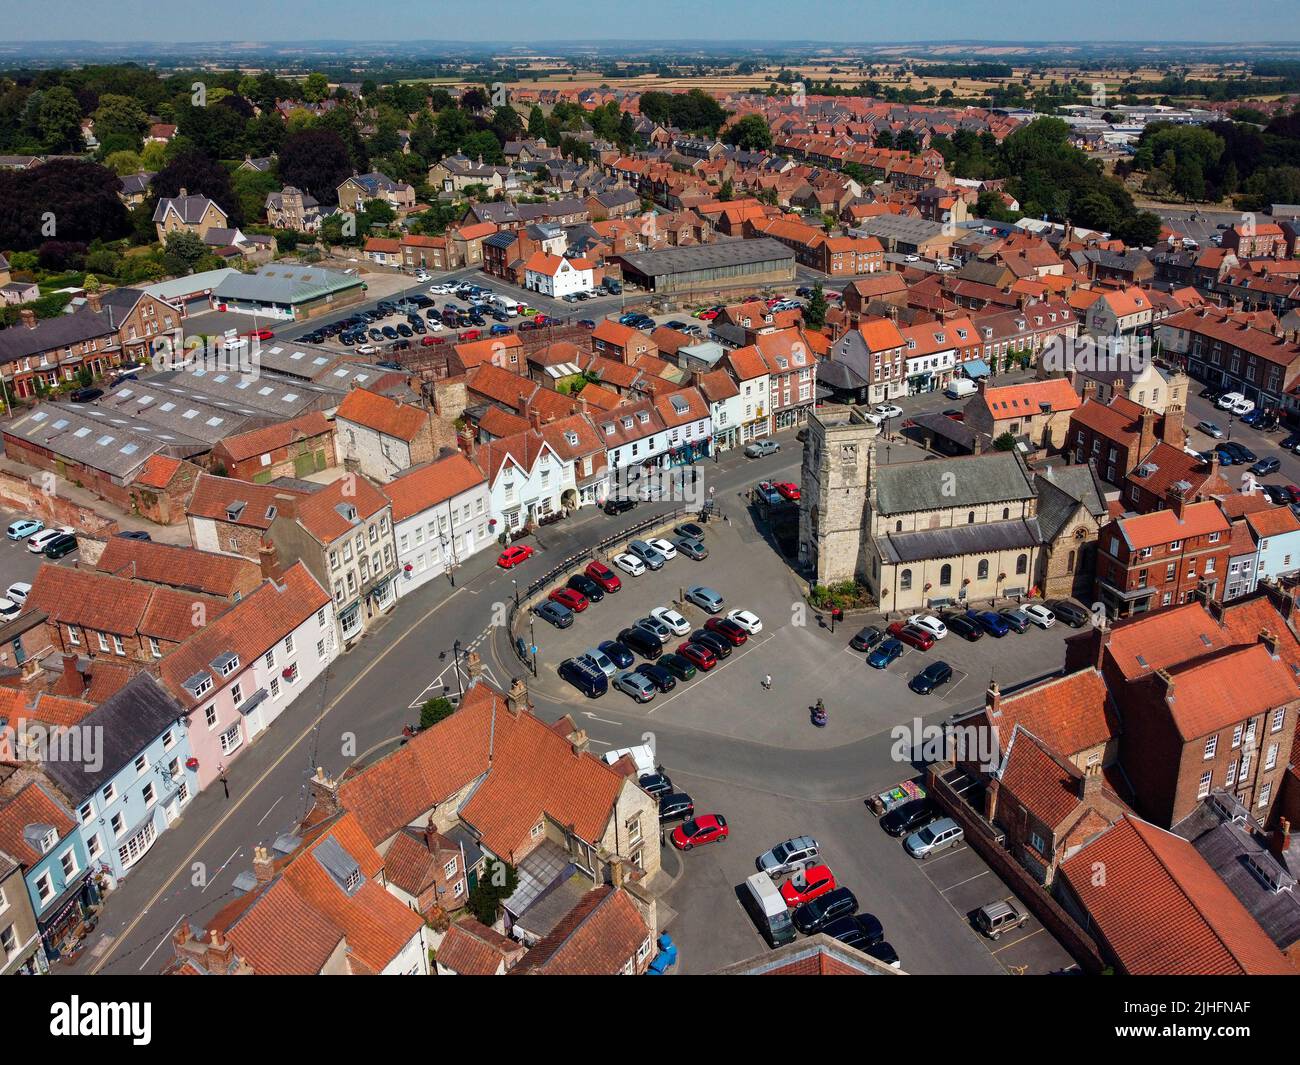 Aerial view of the market square in the market town of Malton in North Yorkshire in the northeast of England. Stock Photo